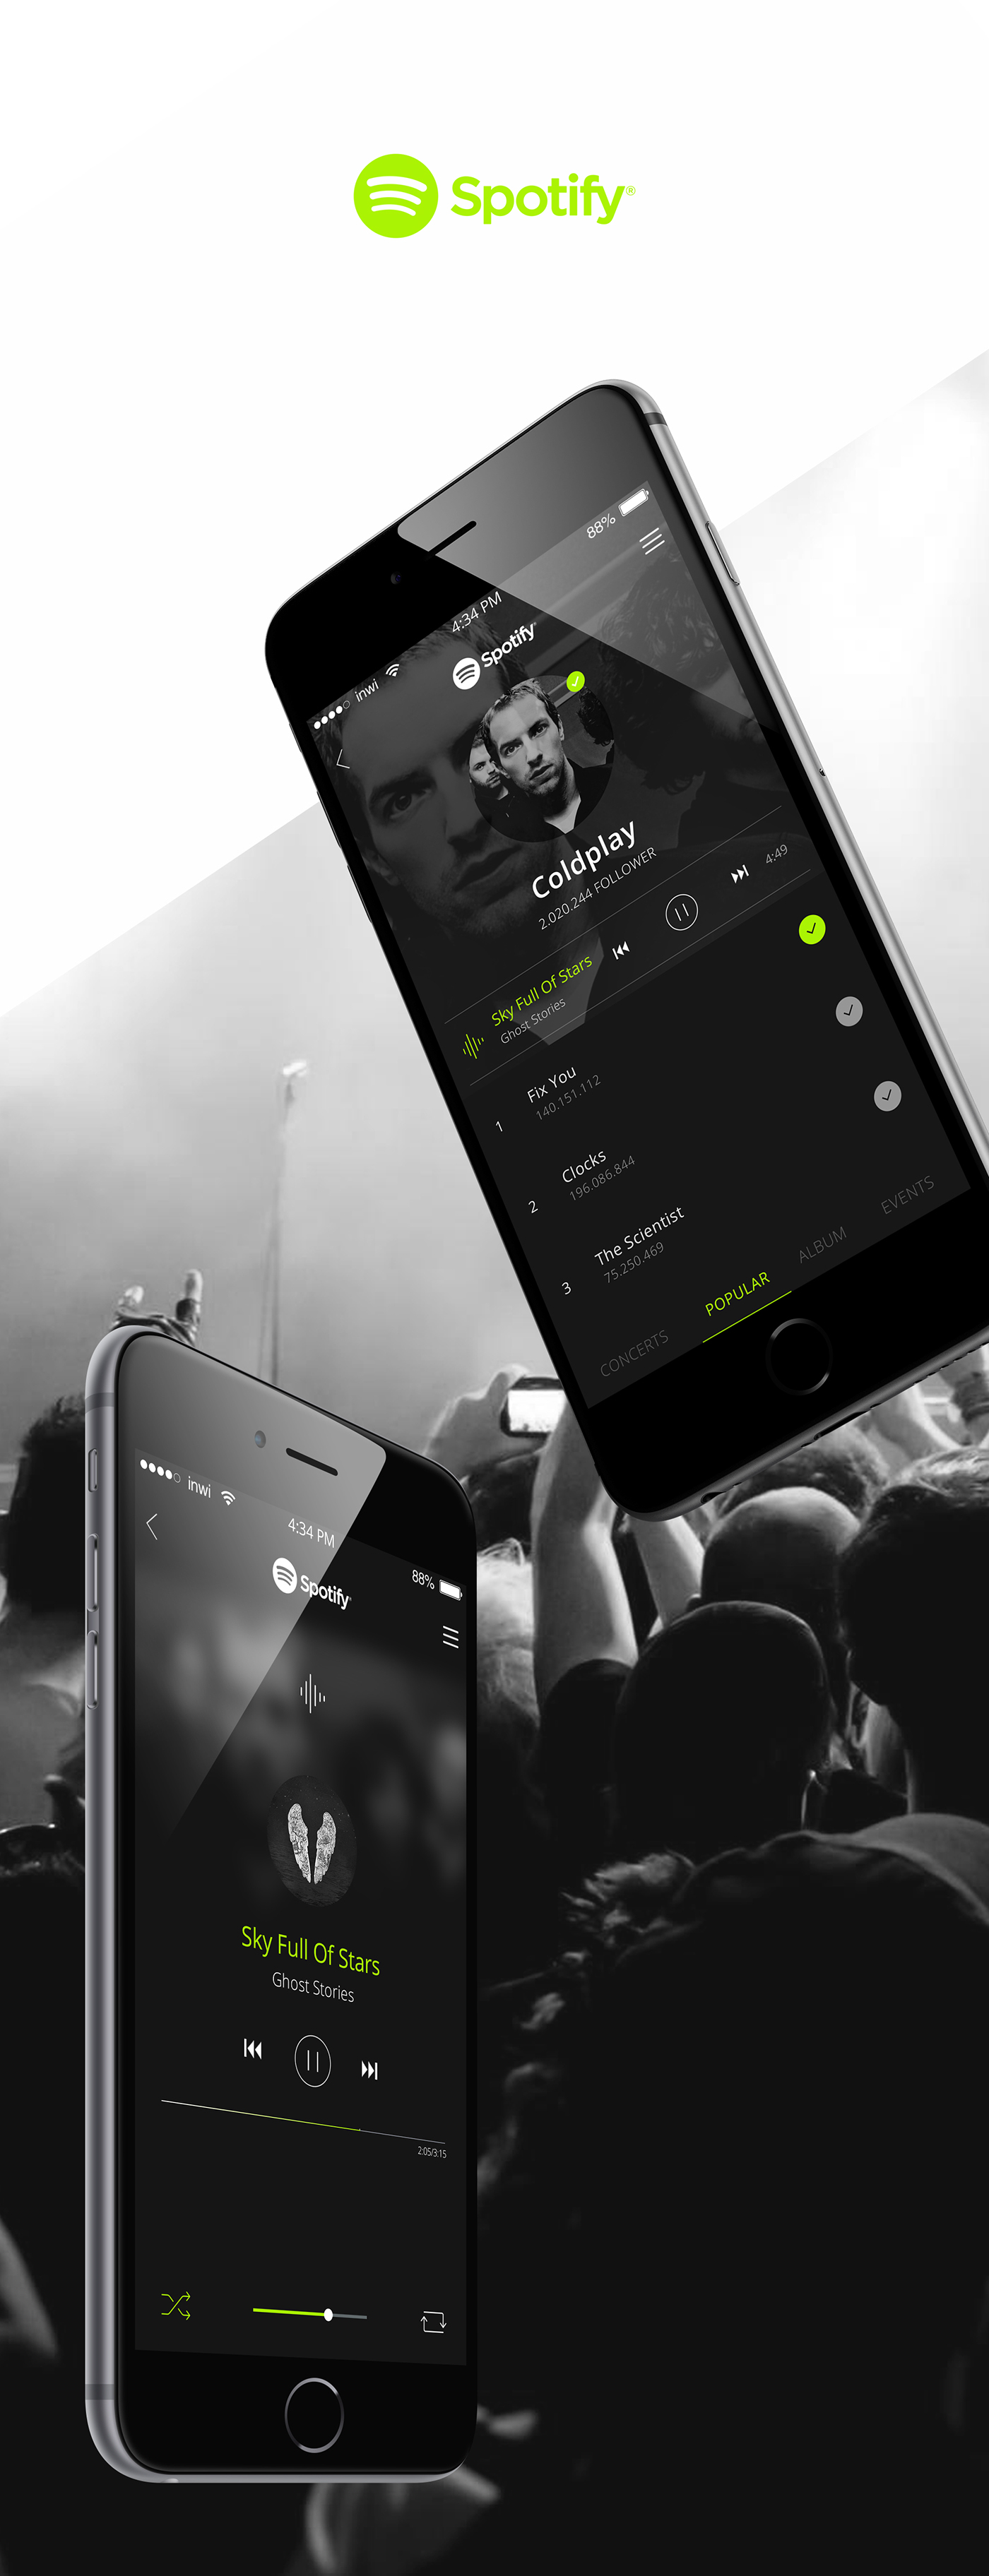 spotify redesign concept Mockup free app ios android material UI ux Interface green flat Coldplay